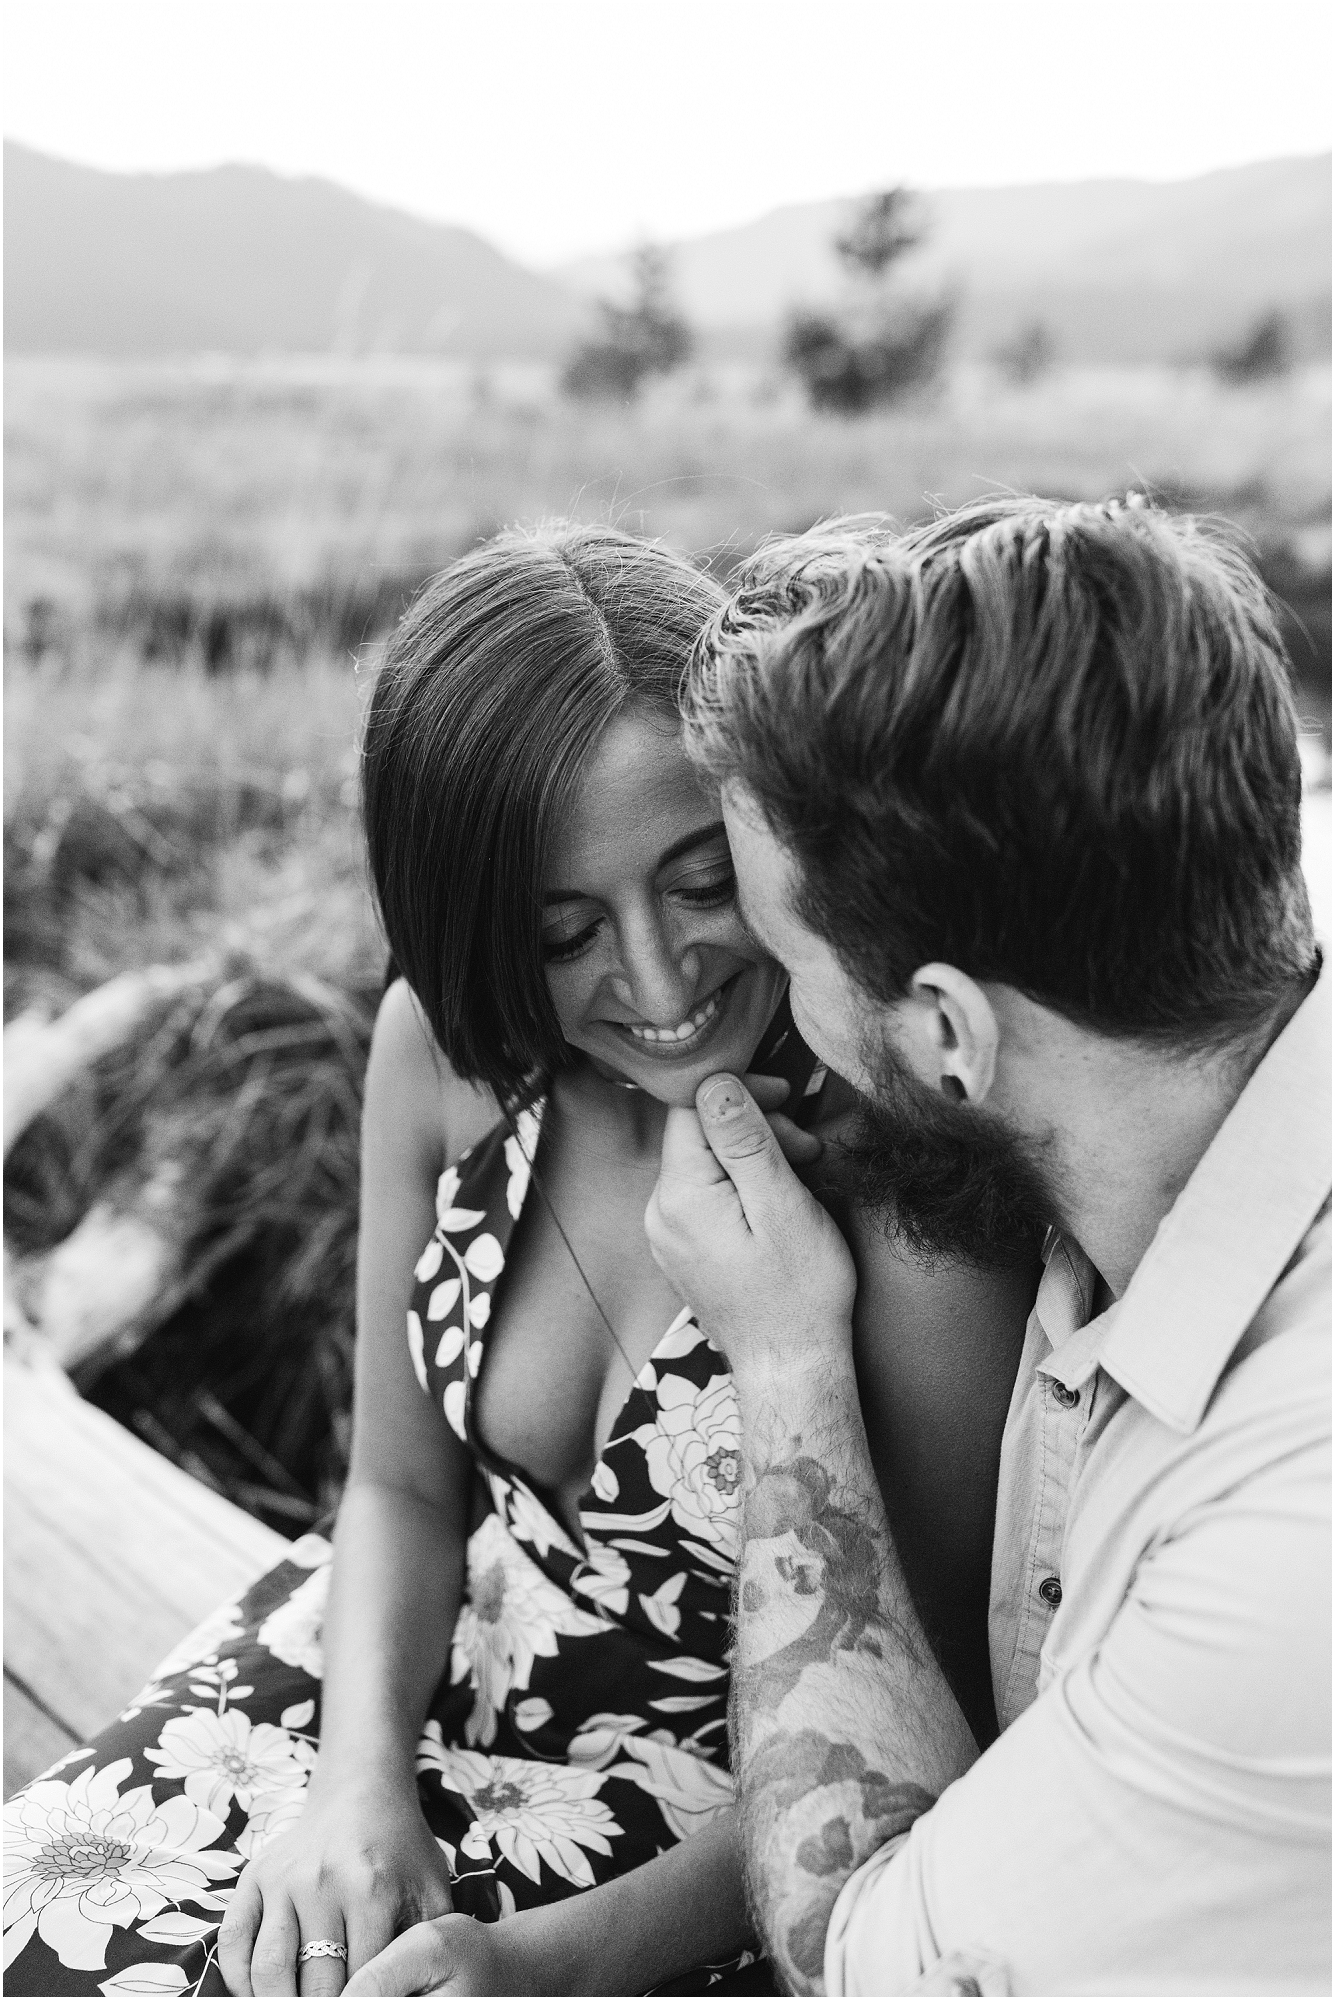 A moody black and white engagement photo session at Sparks Lake near Bend, OR. | Erica Swantek Photography